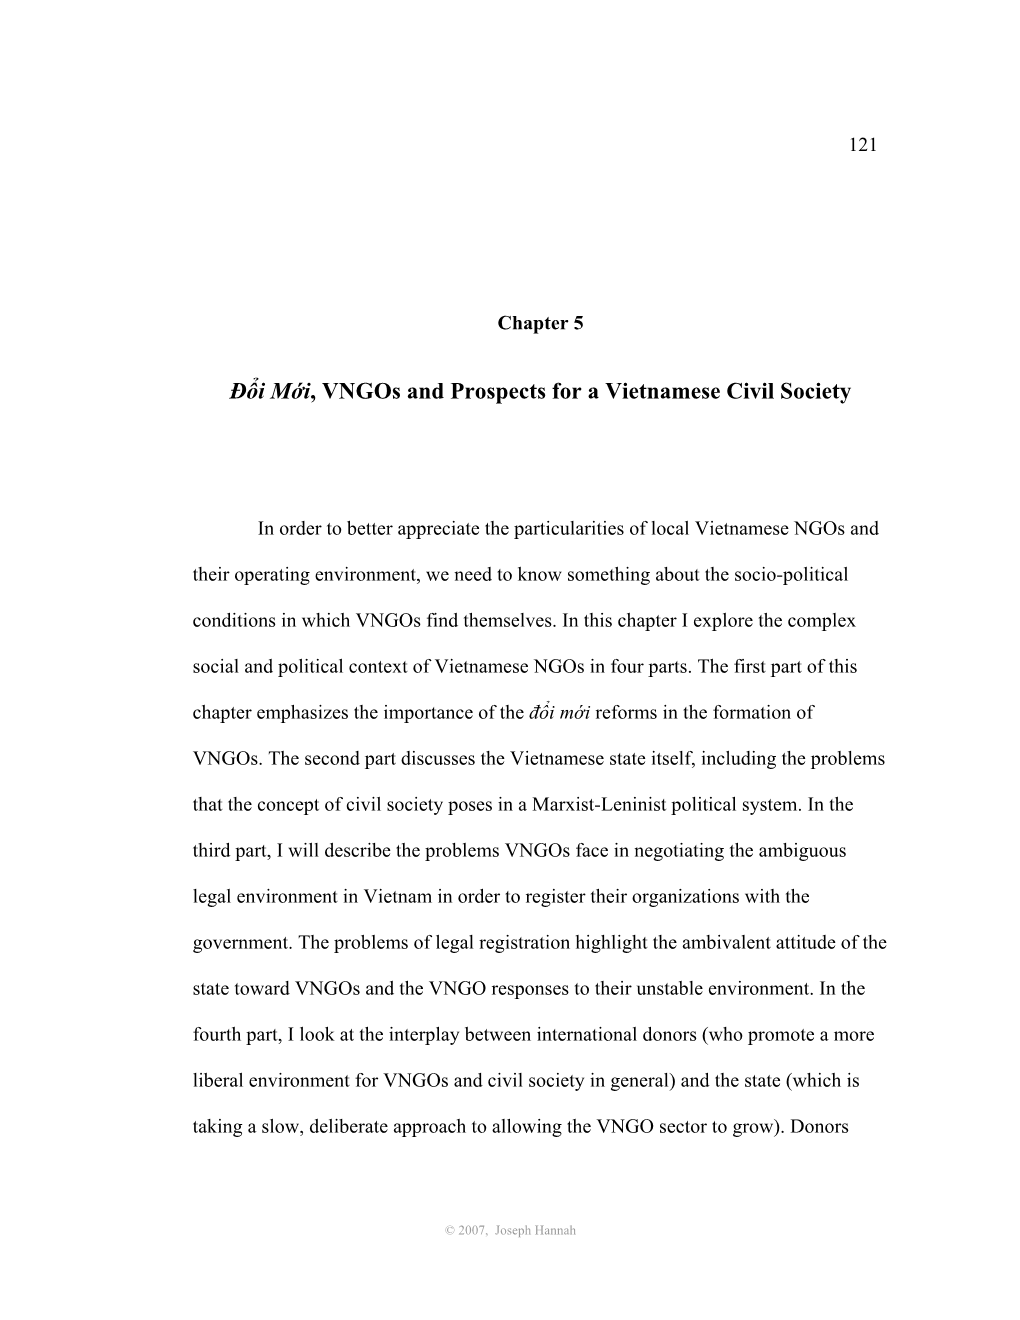 Đổi Mới, Vngos and Prospects for a Vietnamese Civil Society